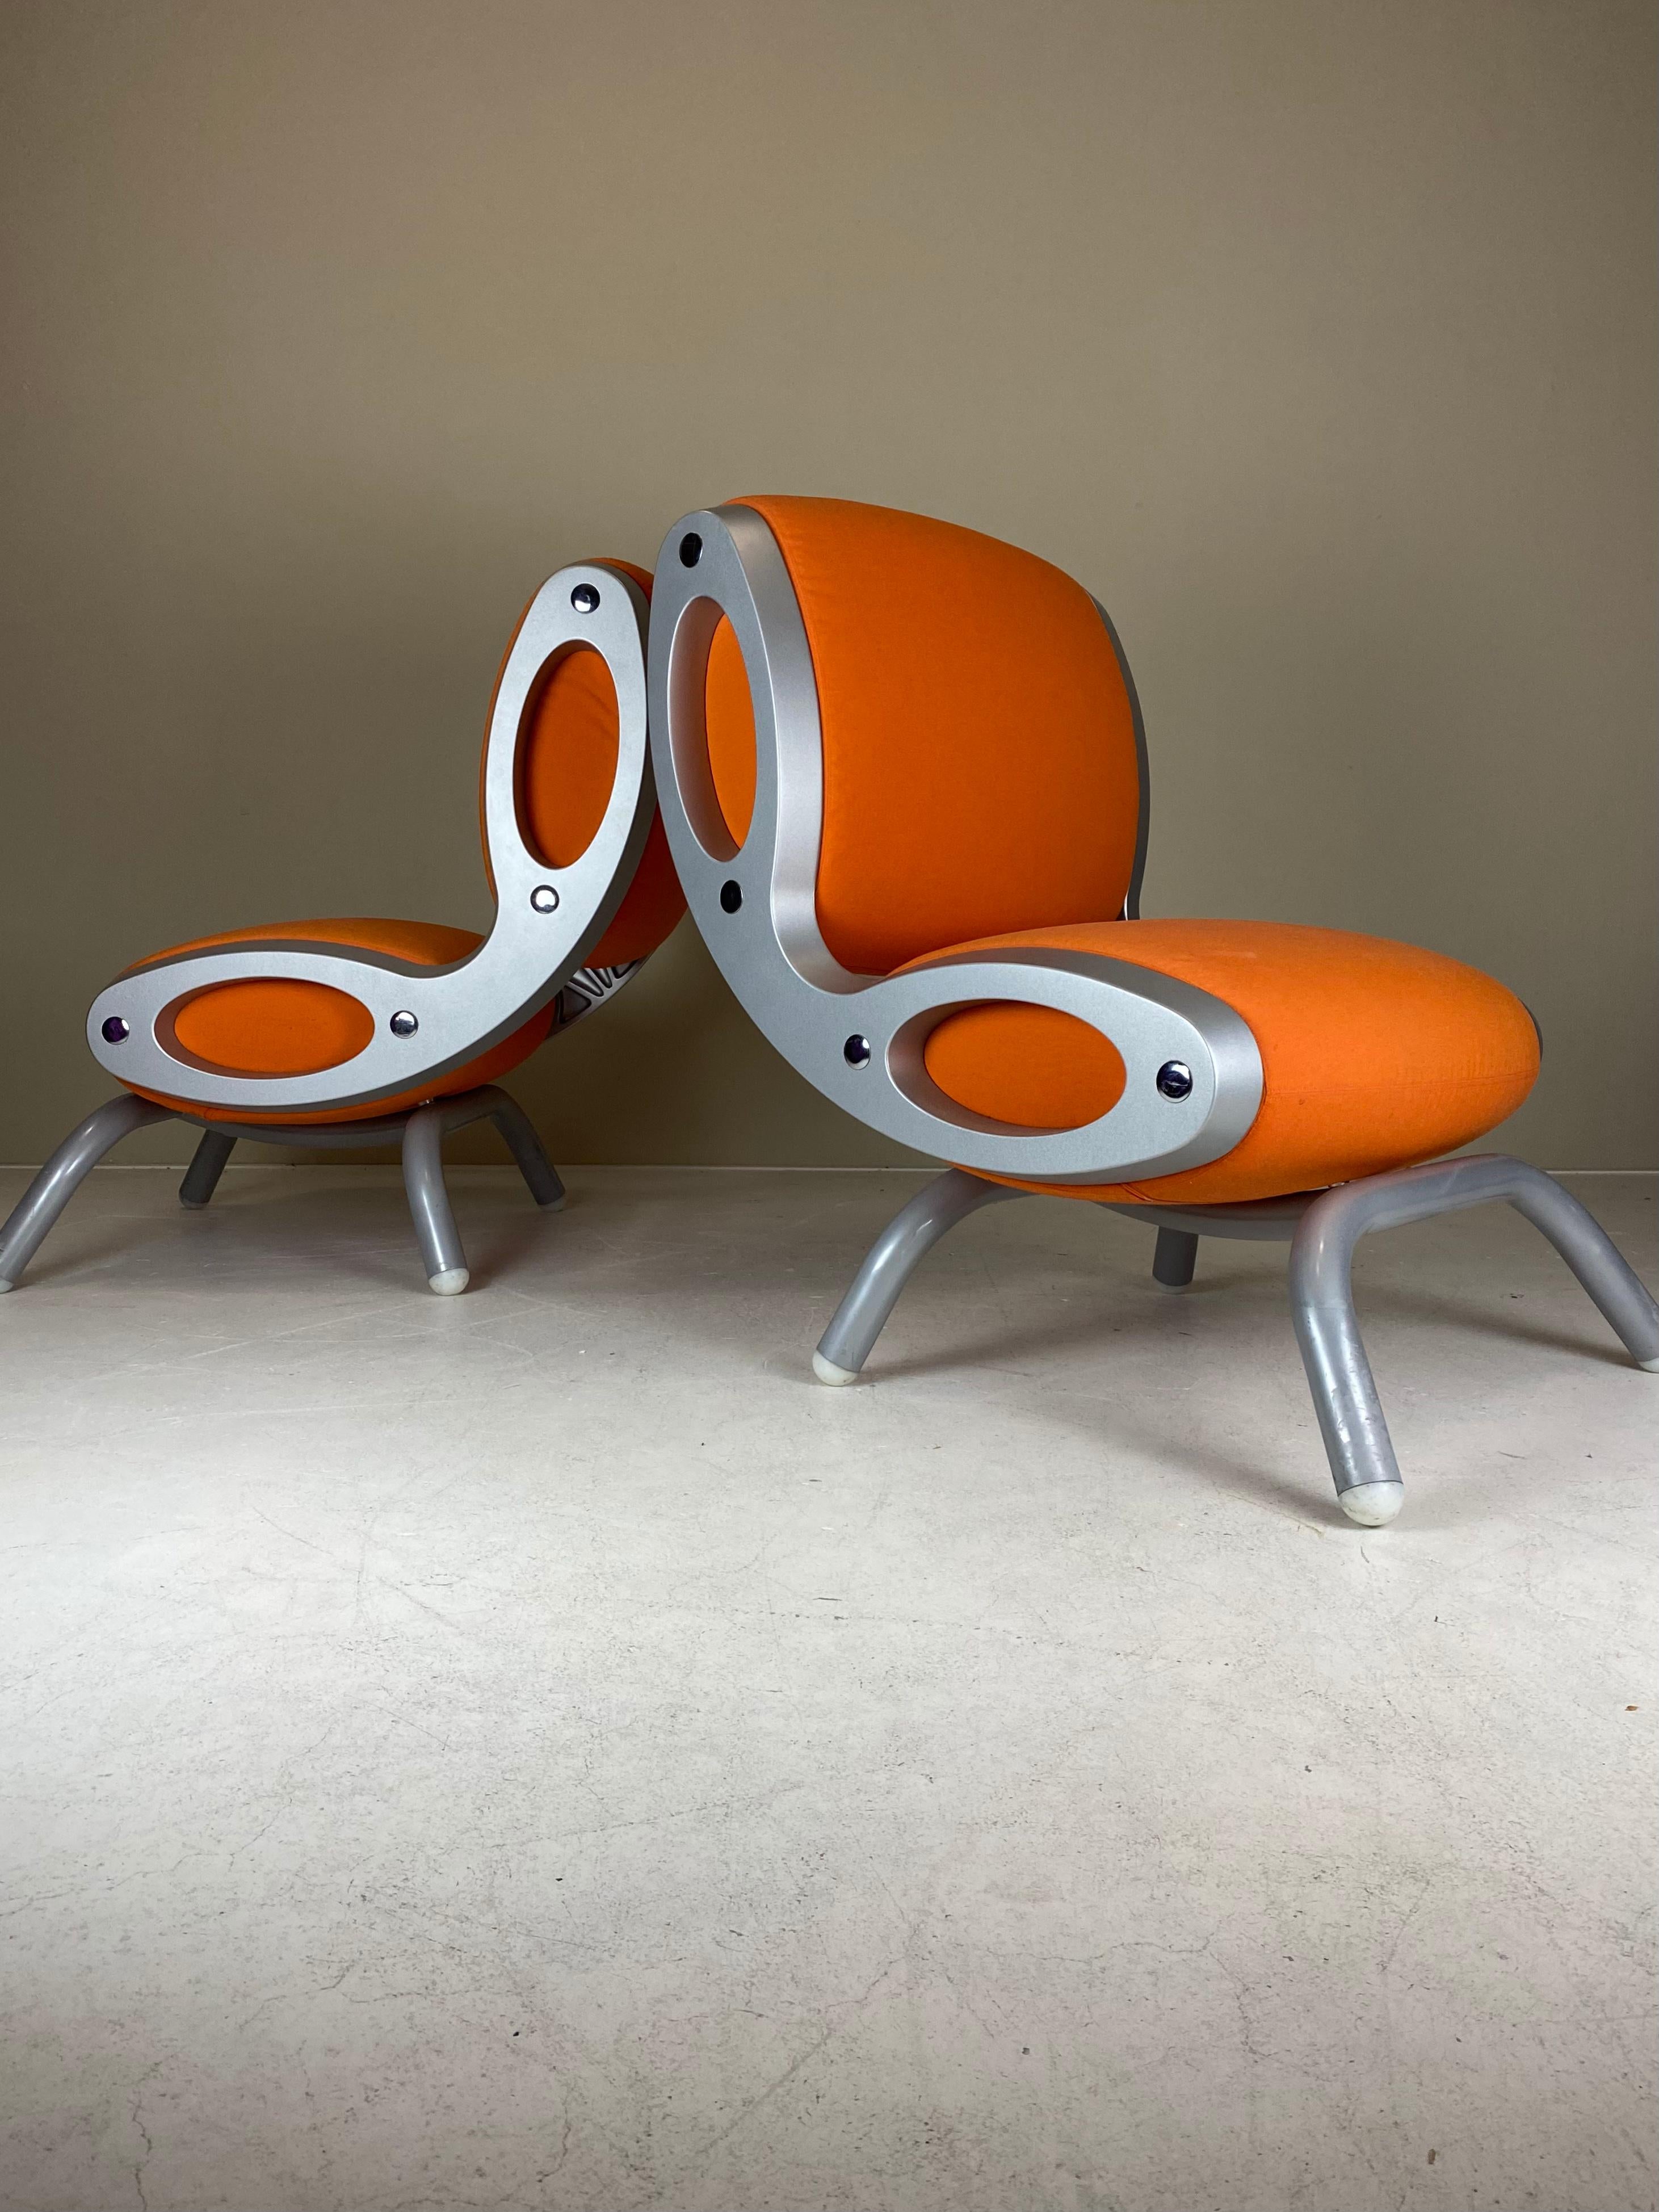 For sale is this lovely and rare set of two Gluon Chairs by Marc Newson, produced by Moroso in the ‘90s, and no longer in production today. 

The Gluon Chair was conceived as a modular chair that can be ‘glued‘ together to form longer sofas or